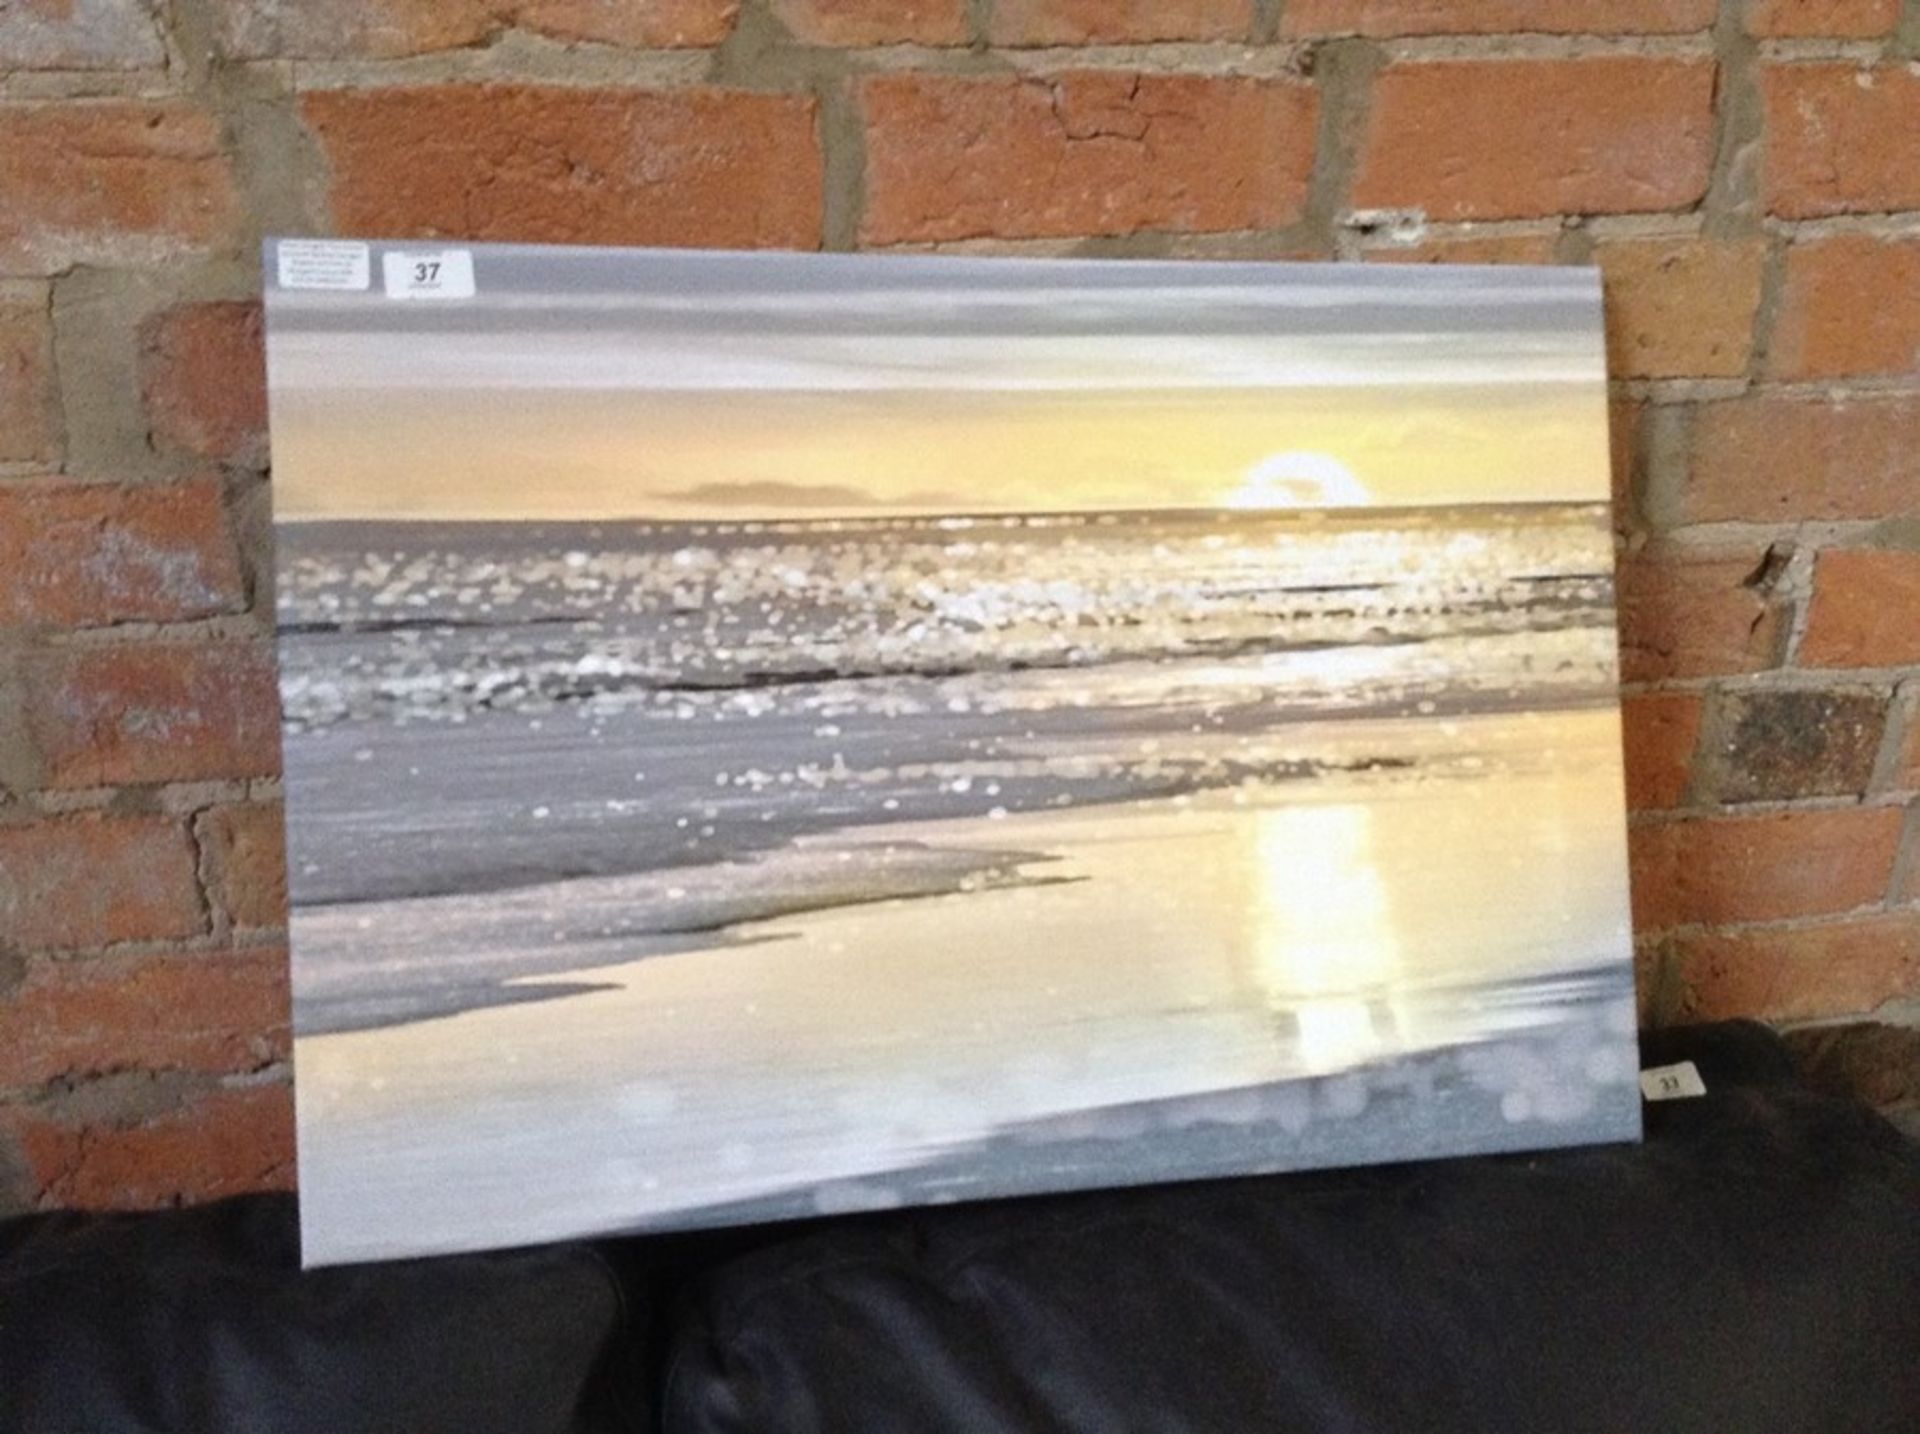 Urban Designs,'That Sunset Moment' by Kate Carrigan Graphic Art Print on Wrapped Canvas RRP -£45.